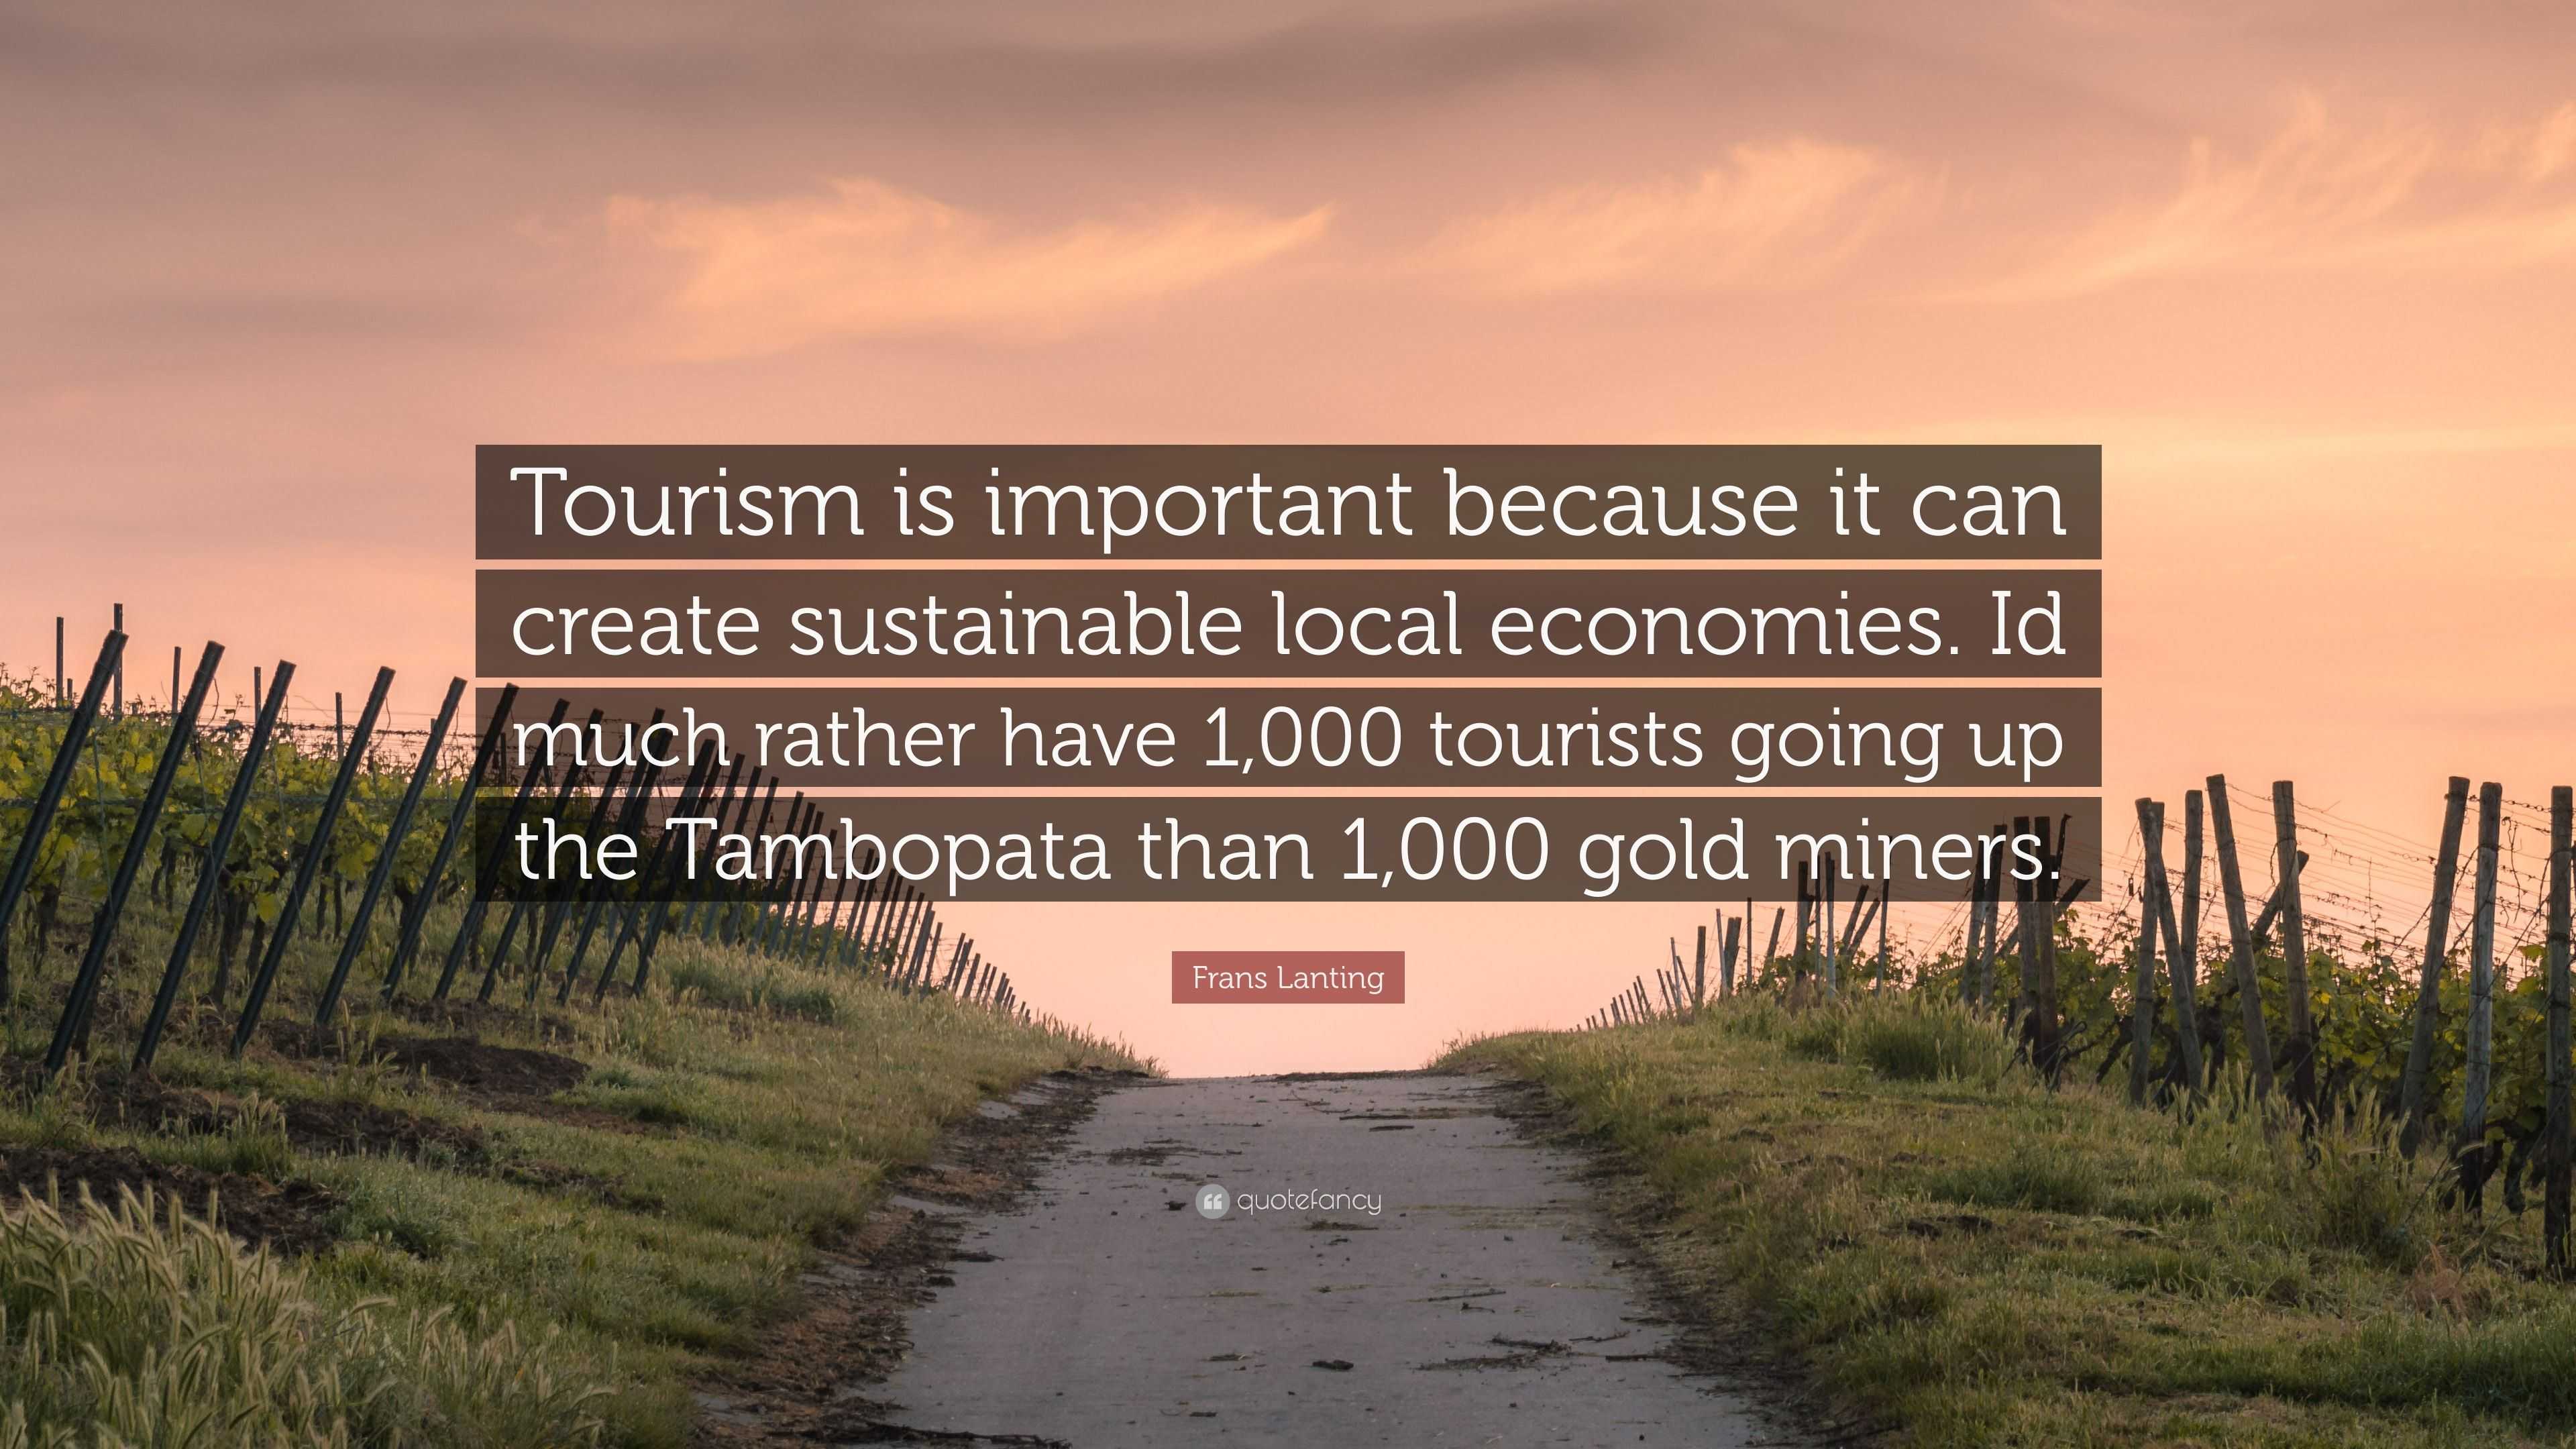 tourism is always a force for good which enables